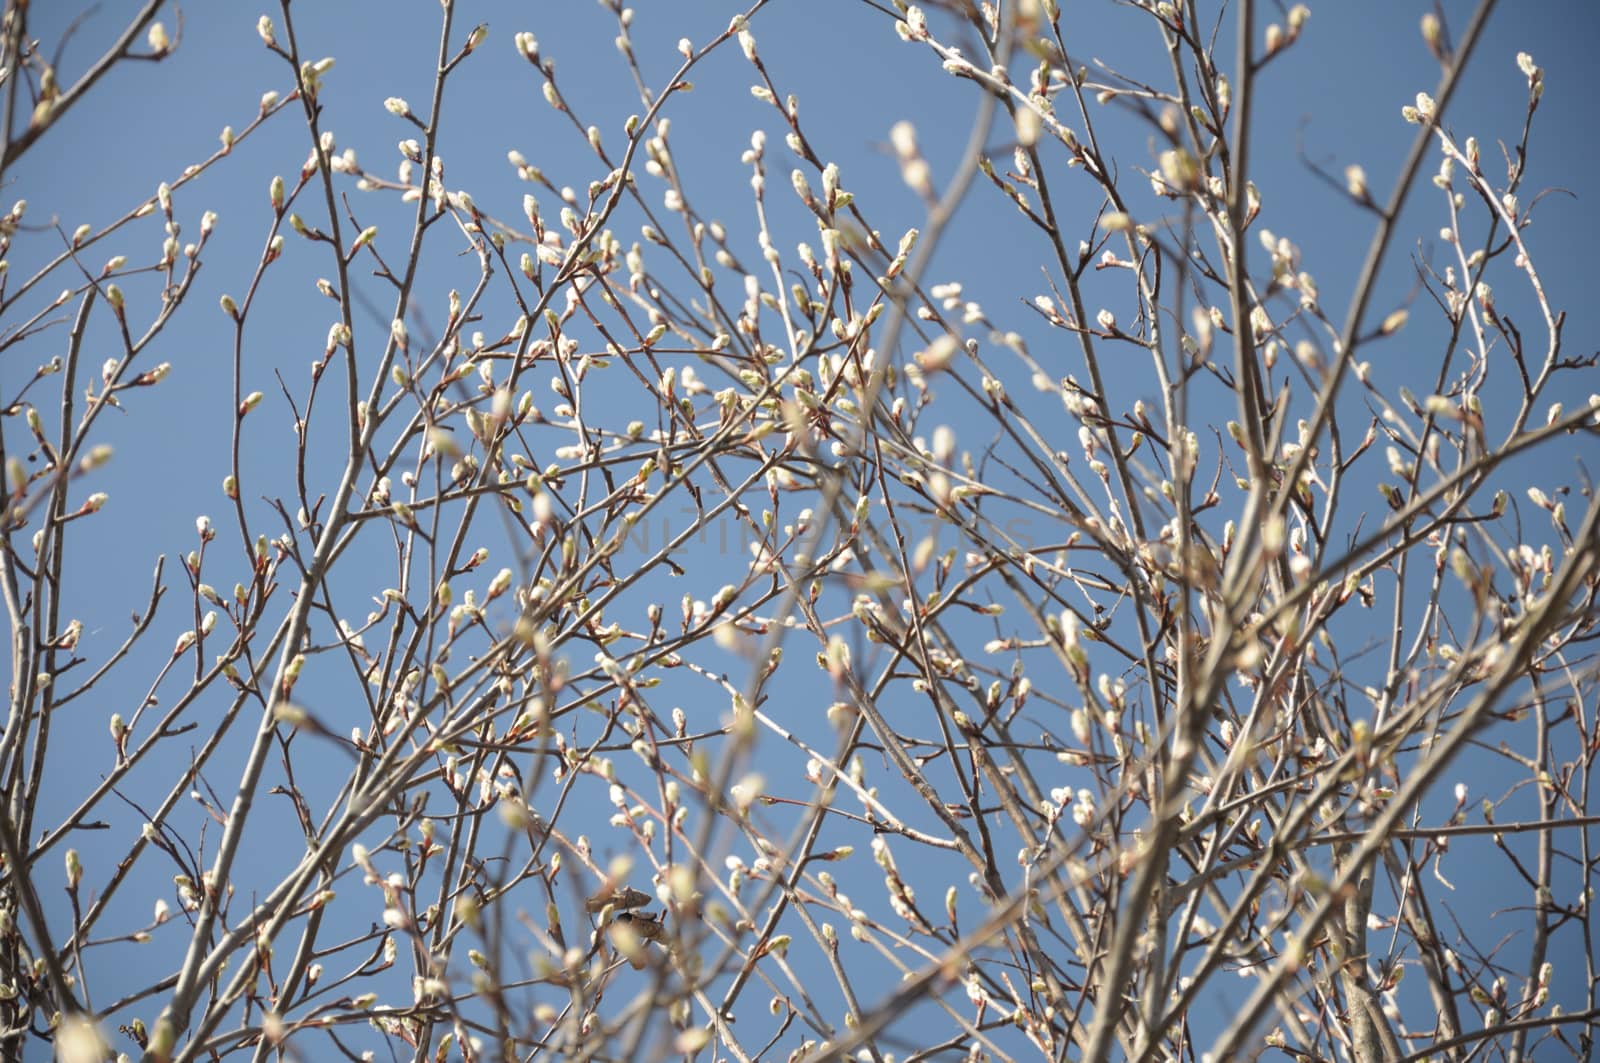 The small spring buds on the aldertree with the clear blue sky background